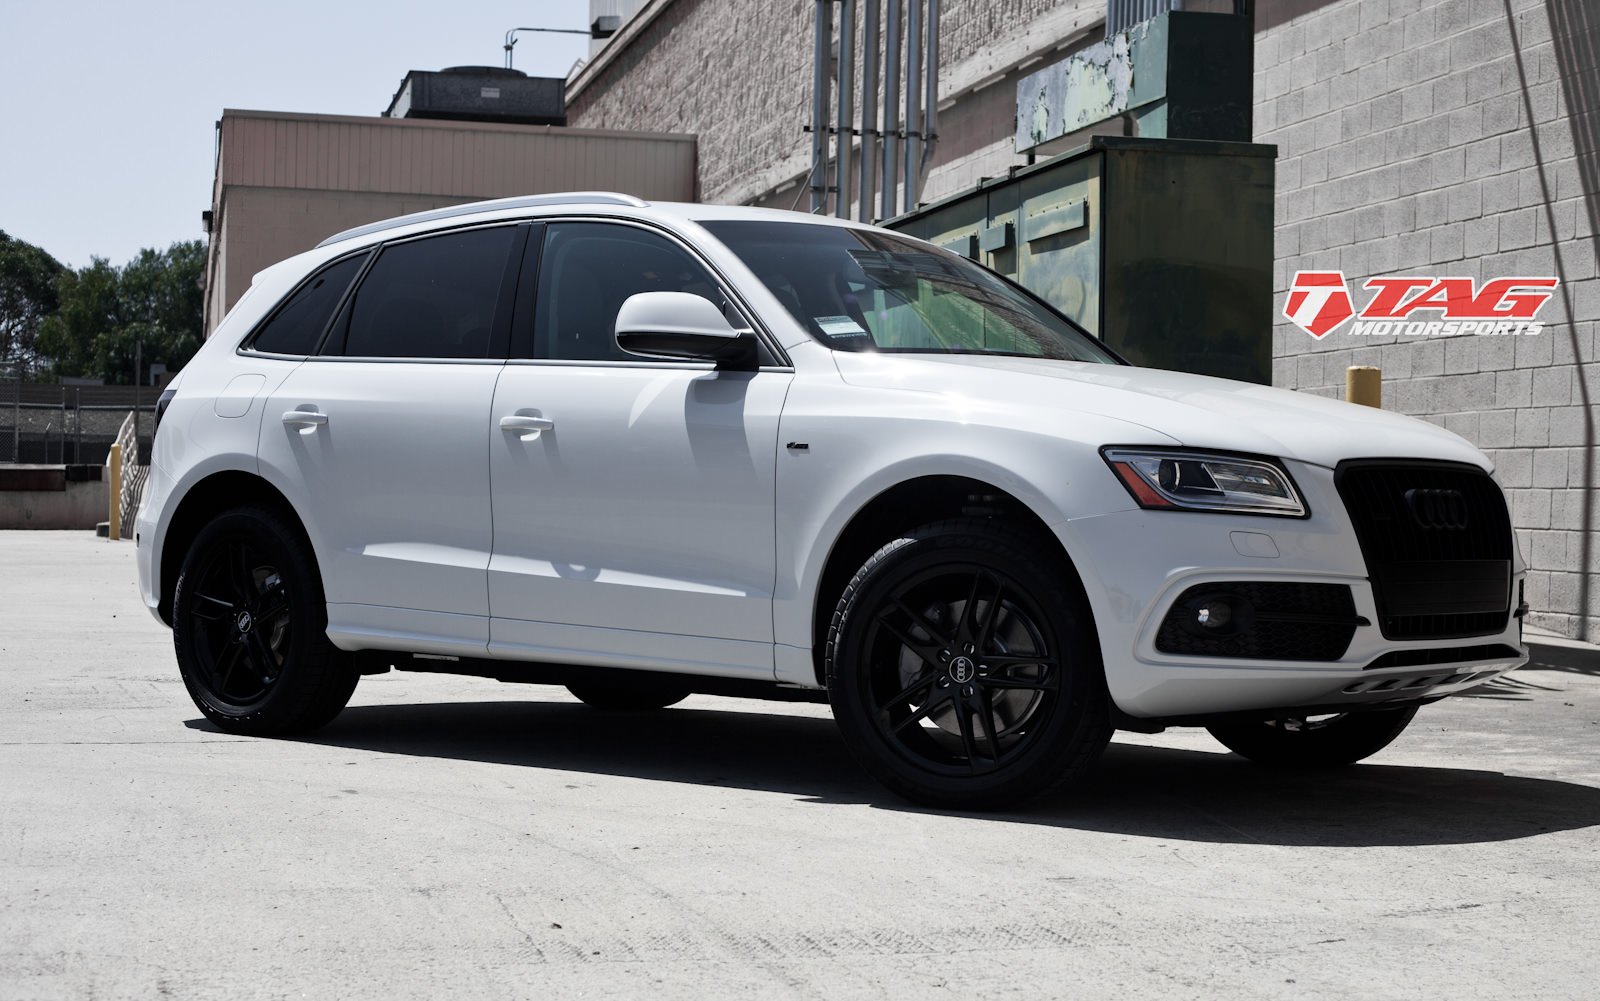 2013 Audi Q5 - TAG Blackout Package - TAG Motorsports.